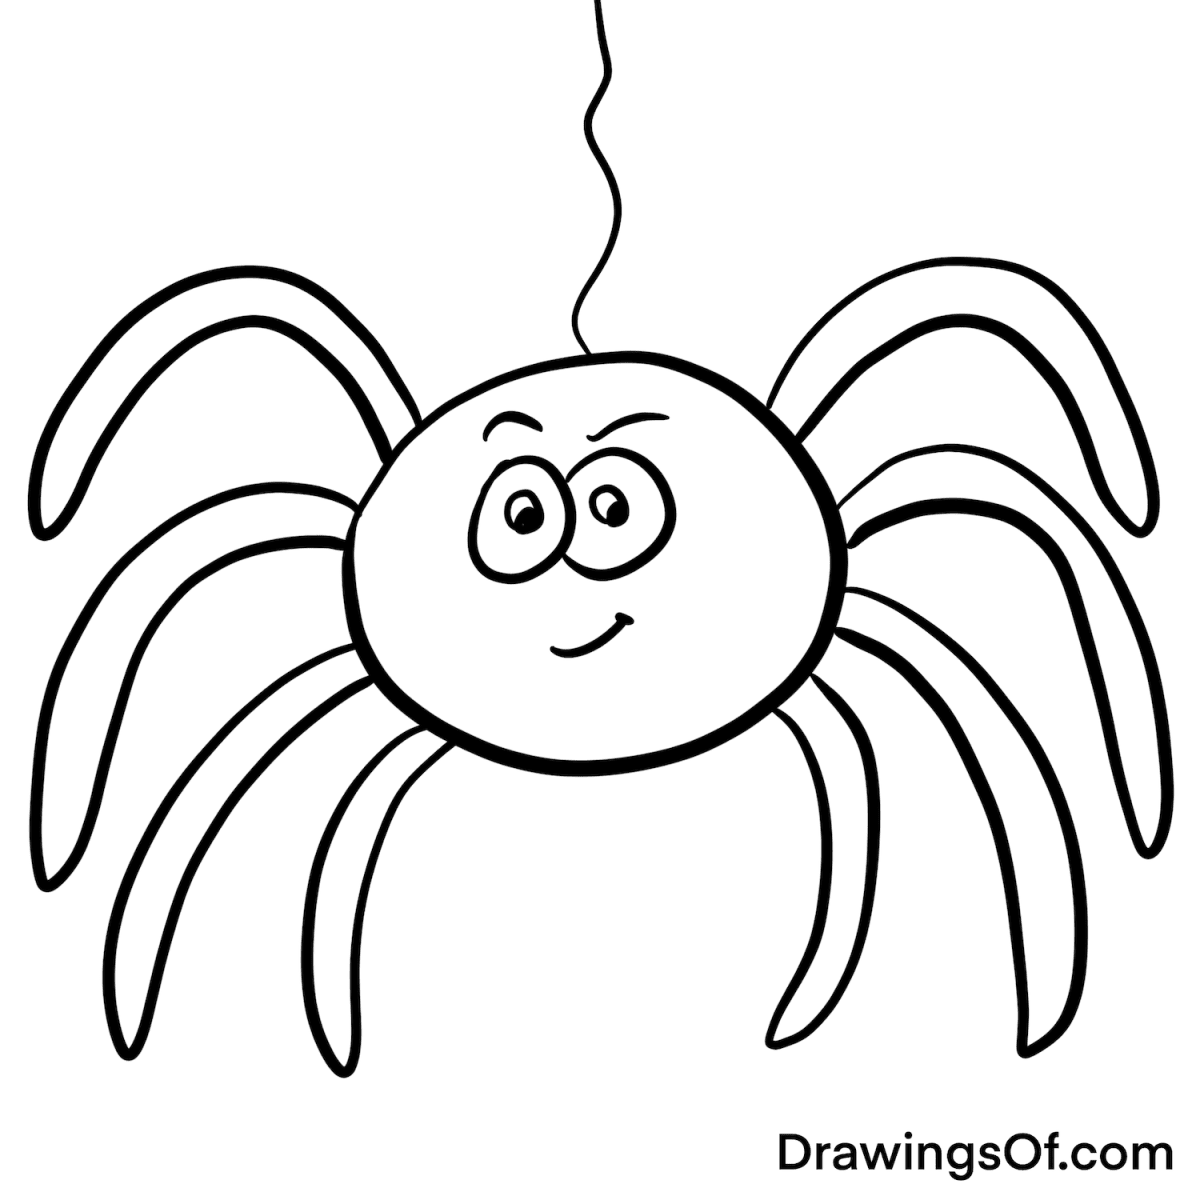 Cute spider drawing black and white